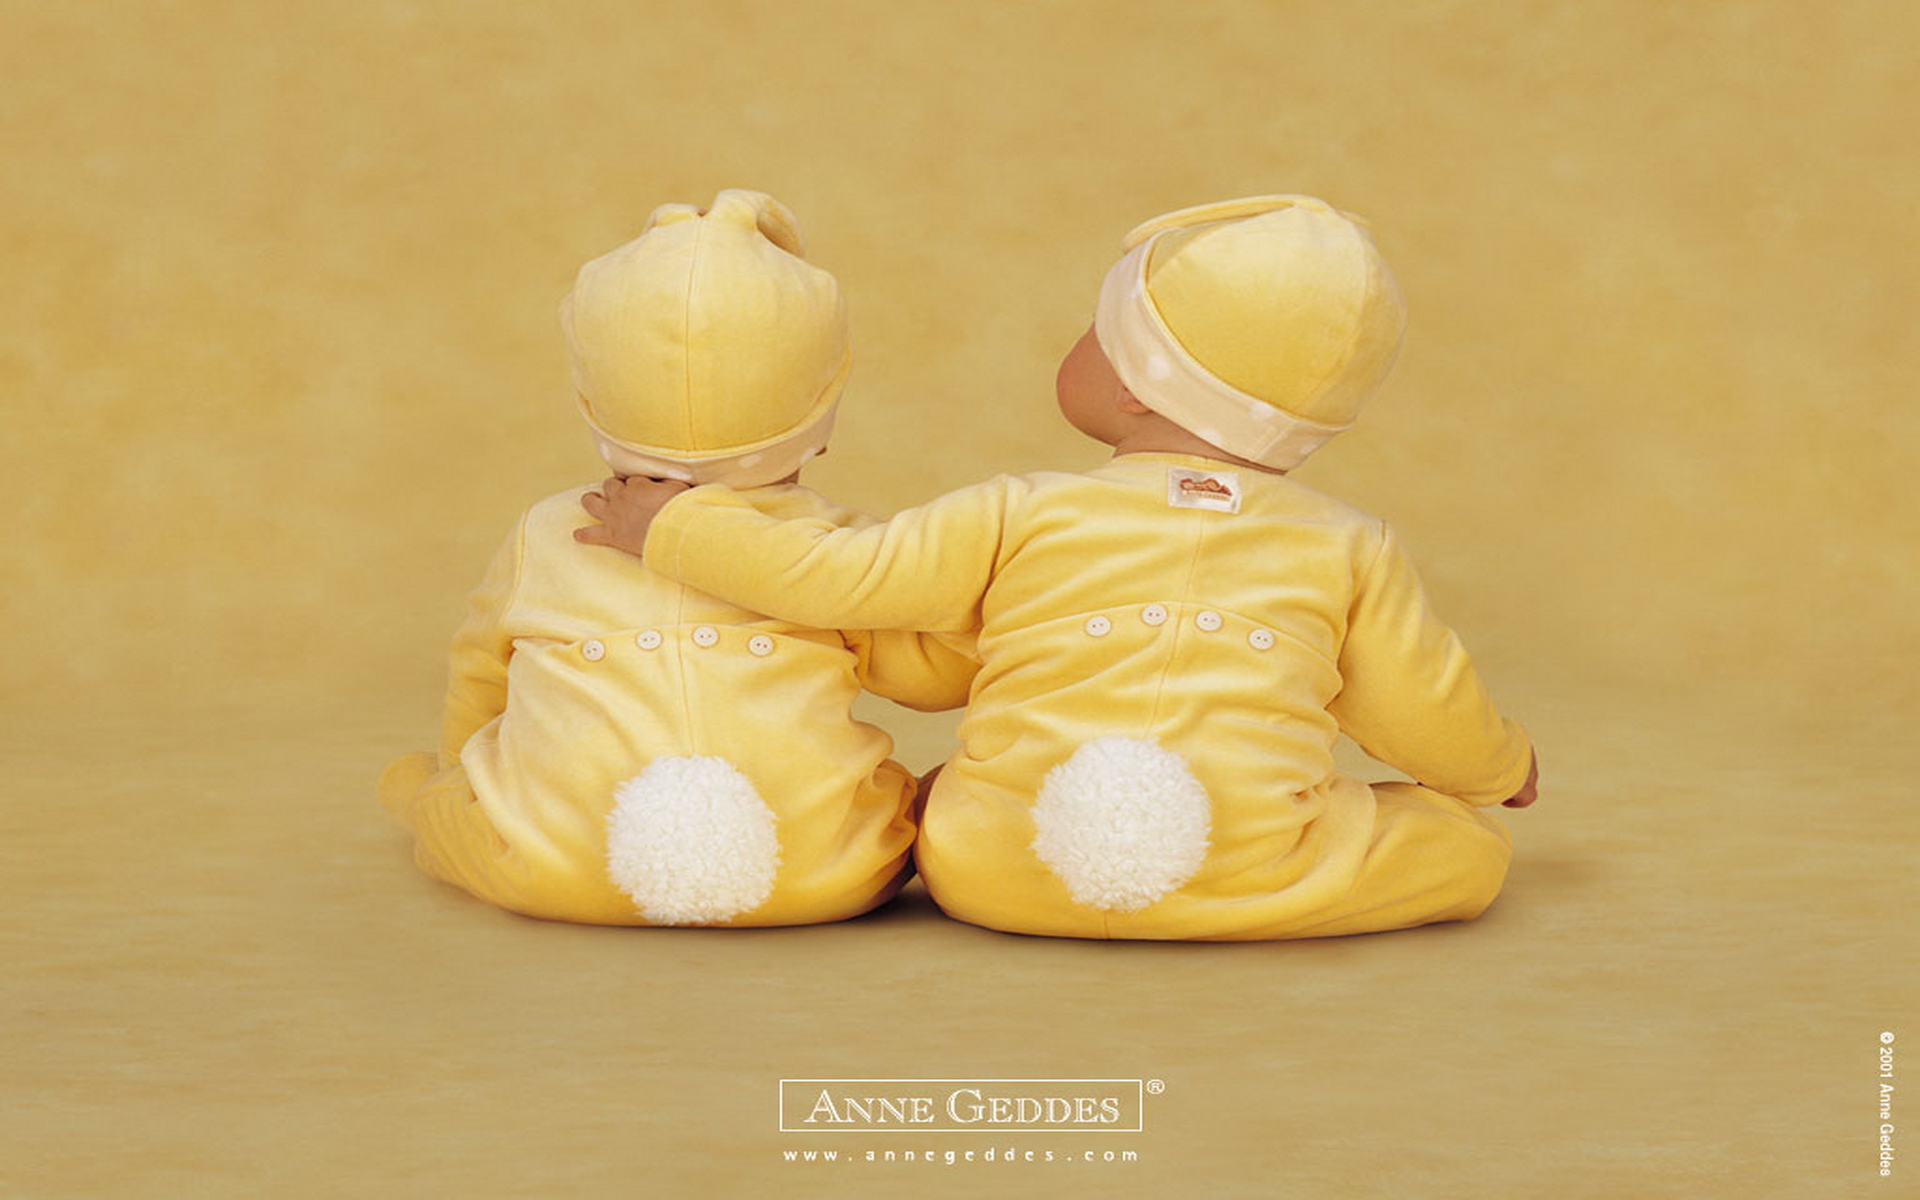 Related Pictures Anne Geddes Baby Wallpaper Prints Desktop